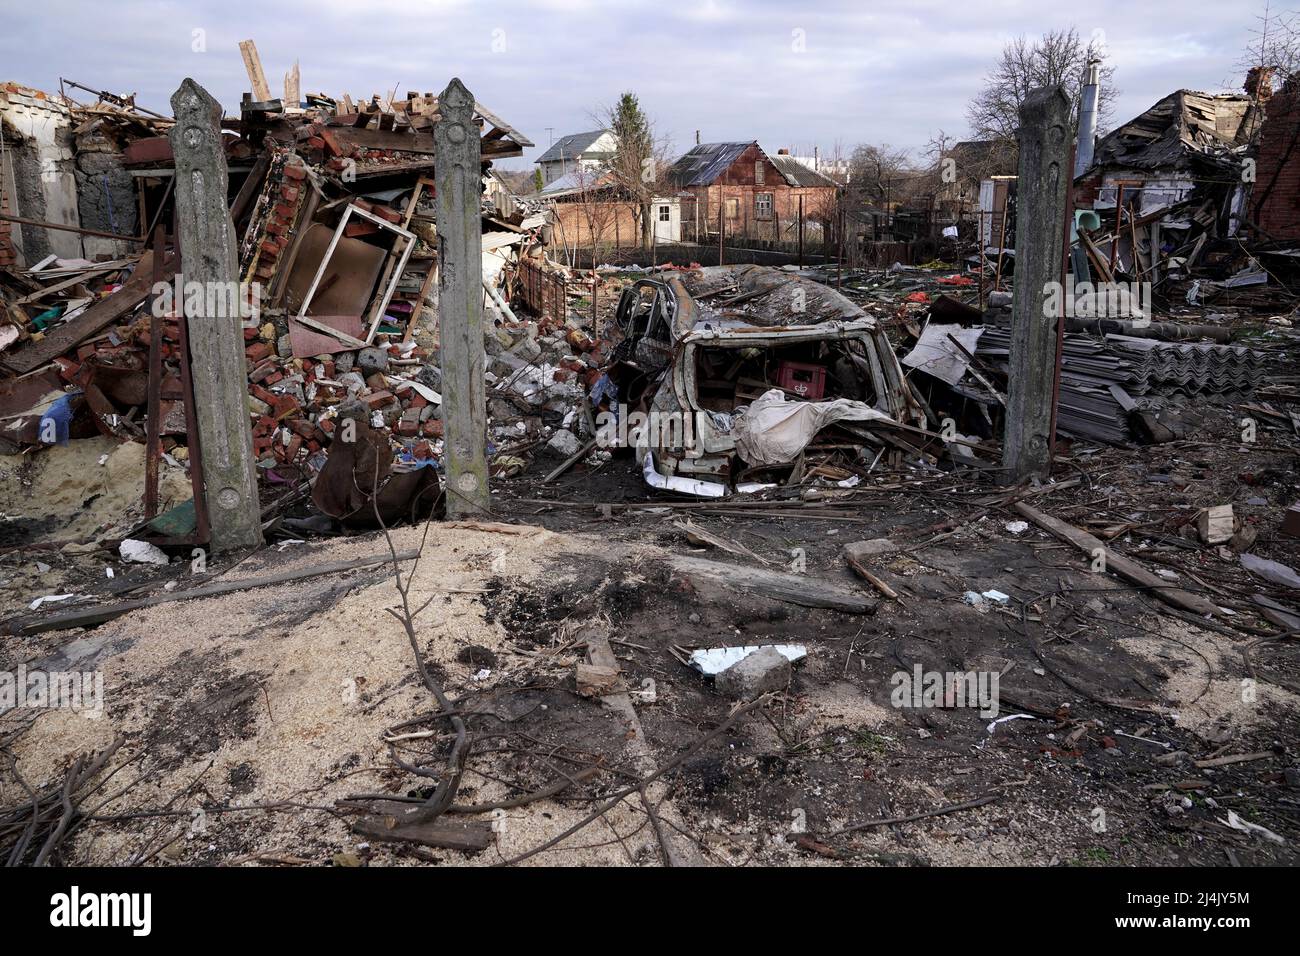 SUMY, UKRAINE - APRIL 14, 2022 - The consequences of Russian shelling are pictured in Sumy, northeastern Ukraine. Stock Photo